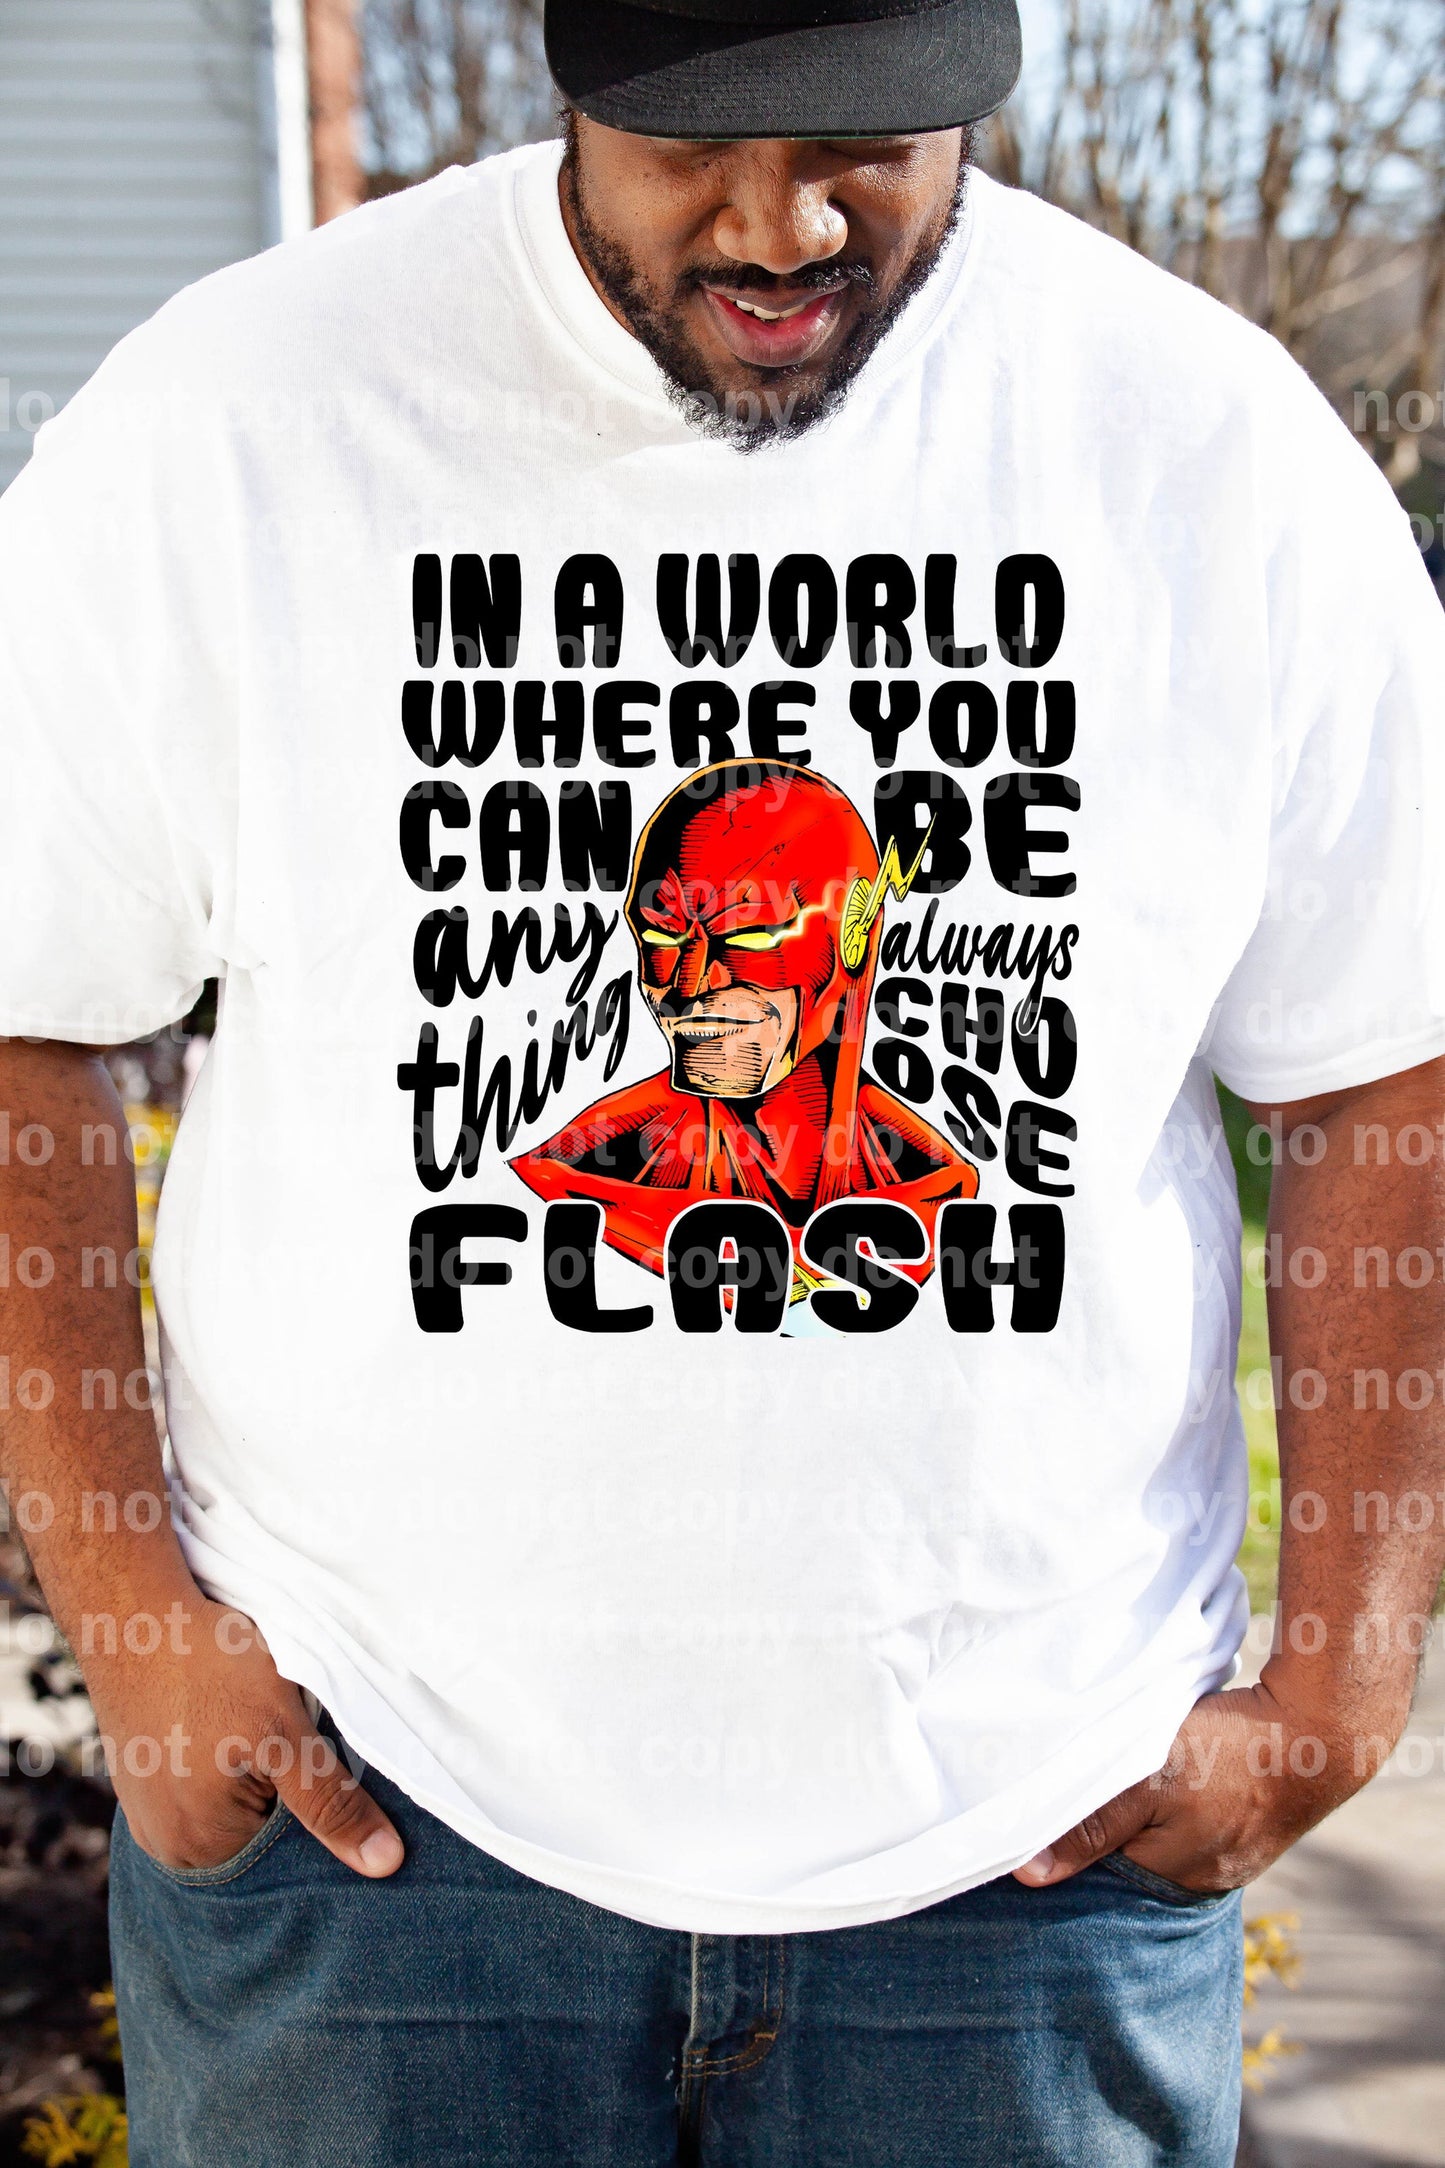 In A World Where You Can Be Anything Choose Flash Dream Print or Sublimation Print